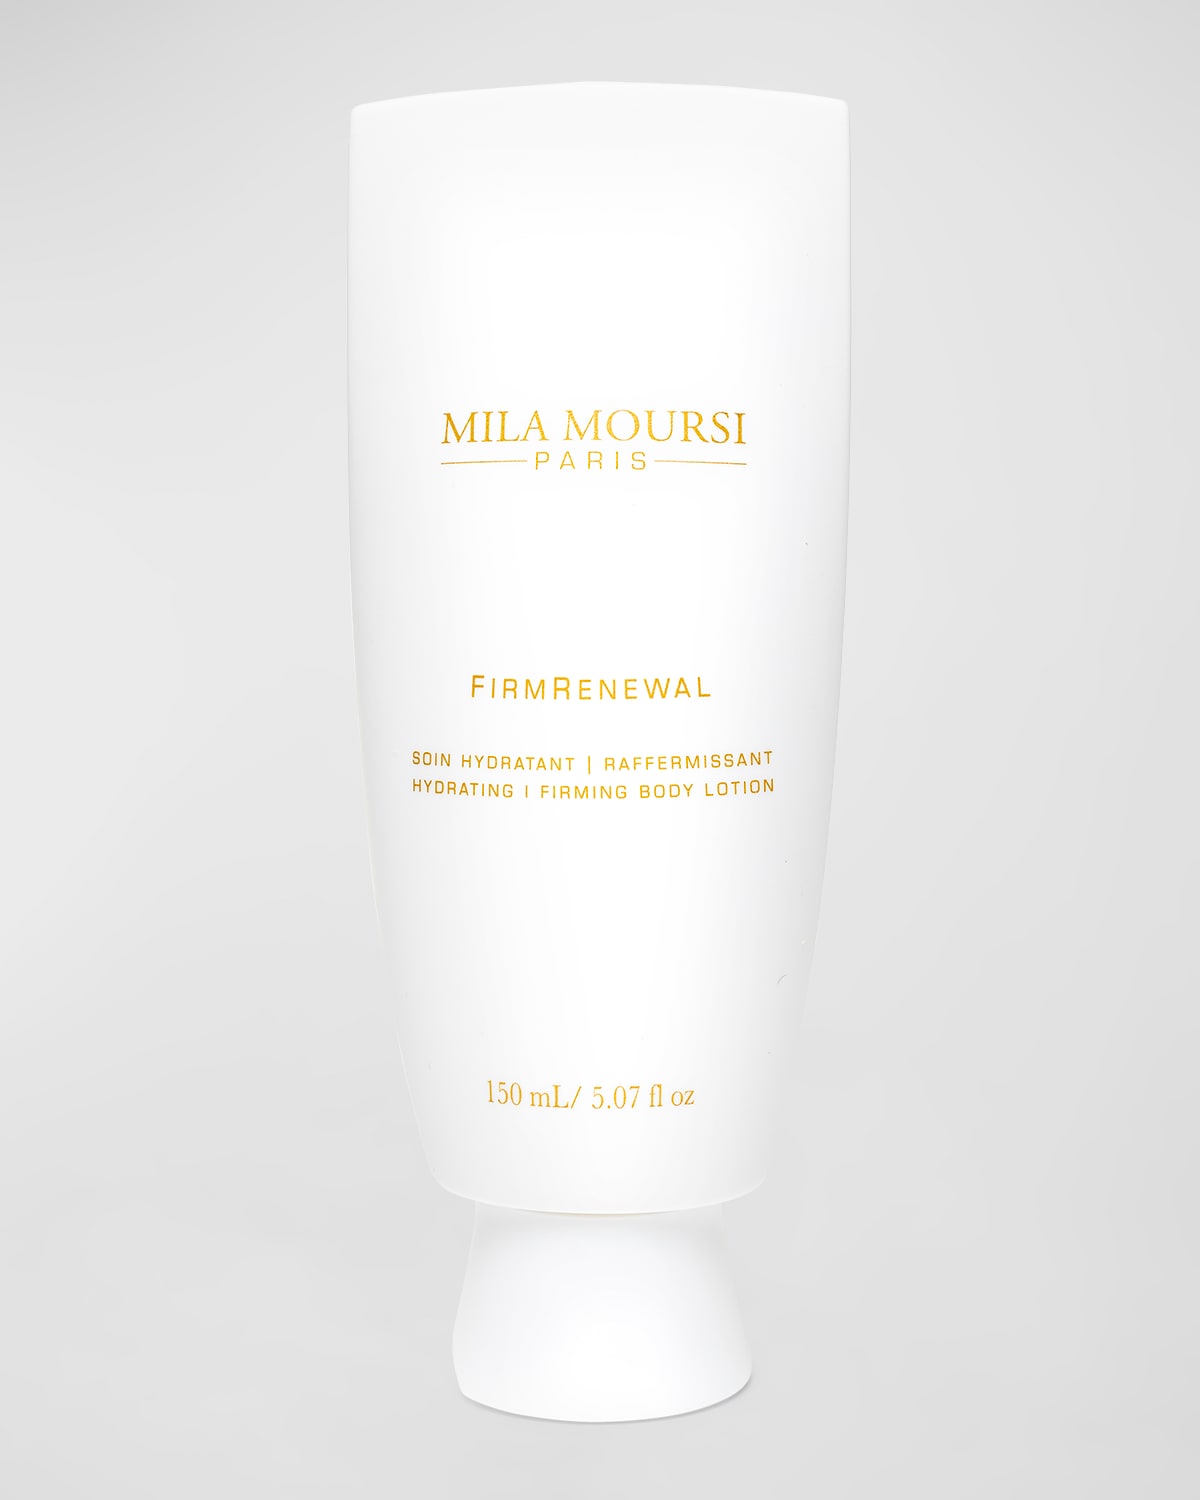 Mila Moursi Firm Renewal Hydrating and Firming Body Lotion, 5.07 oz.